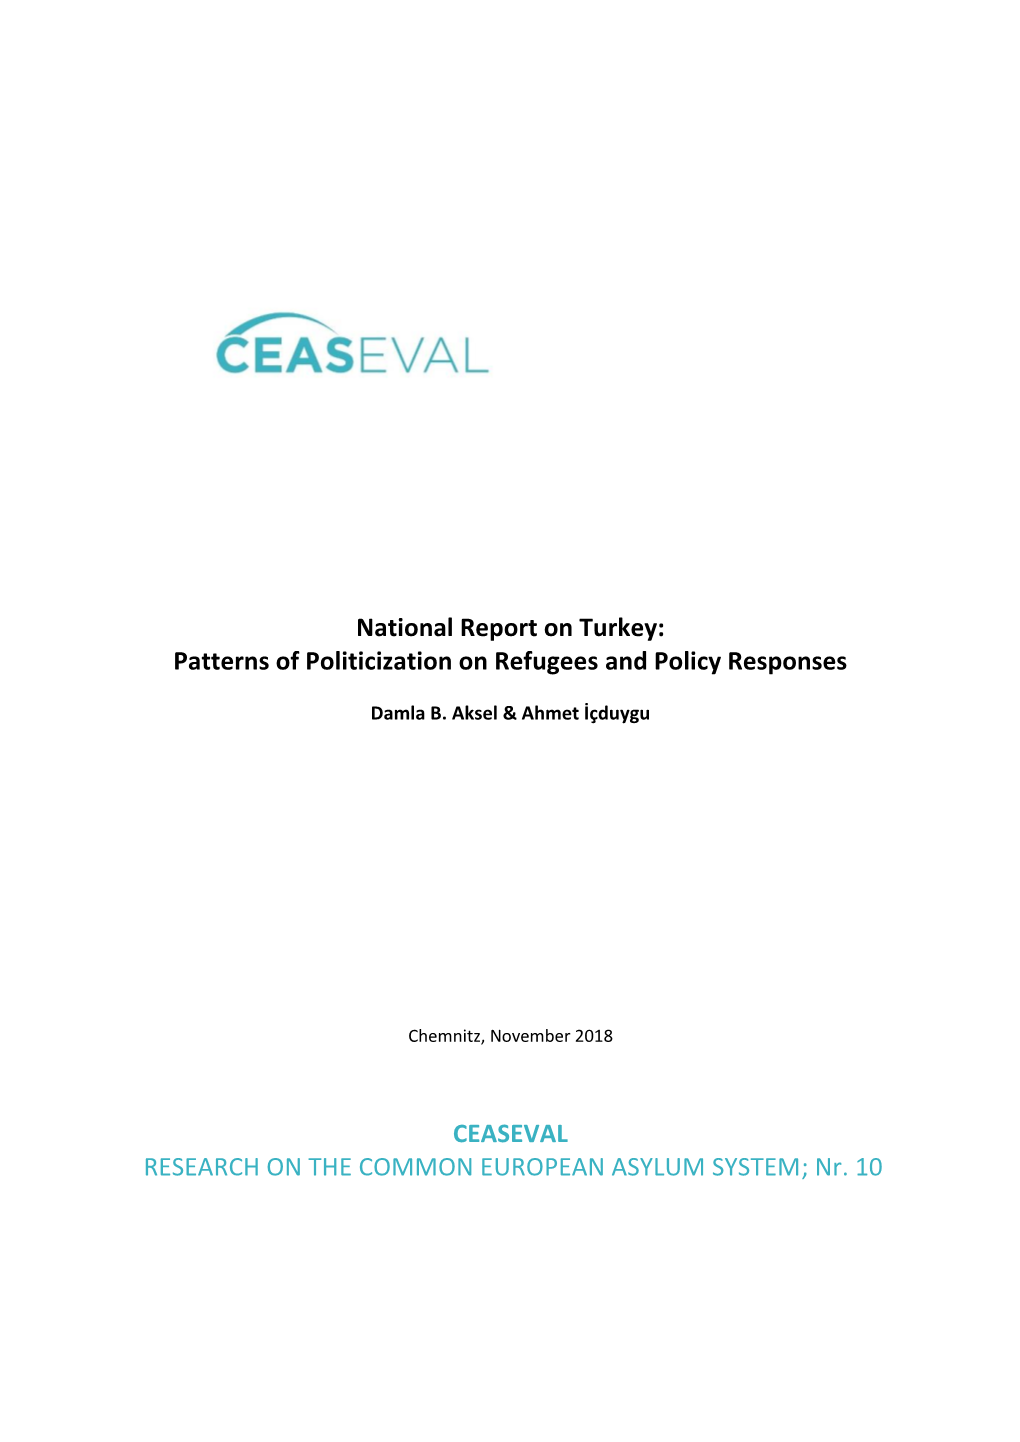 Turkey: Patterns of Politicization on Refugees and Policy Responses